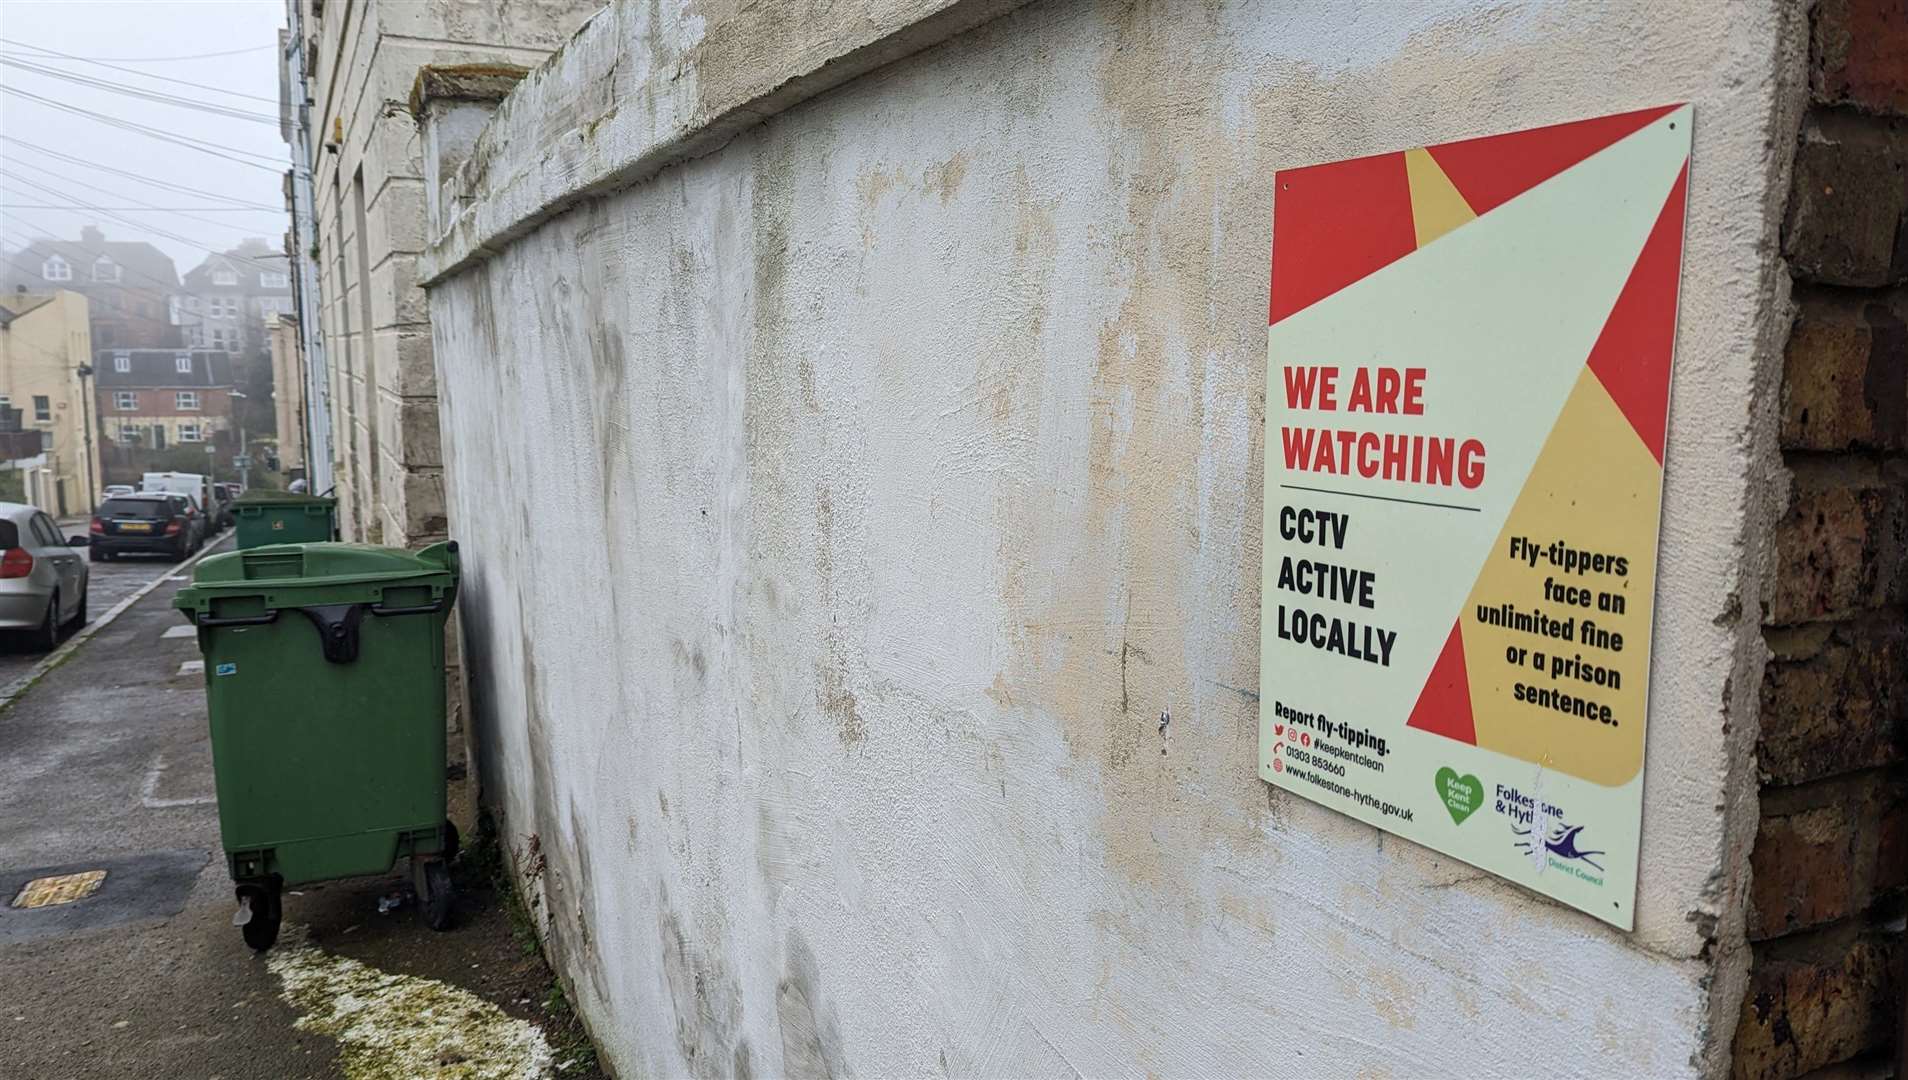 Signs warn against fly-tipping in the area